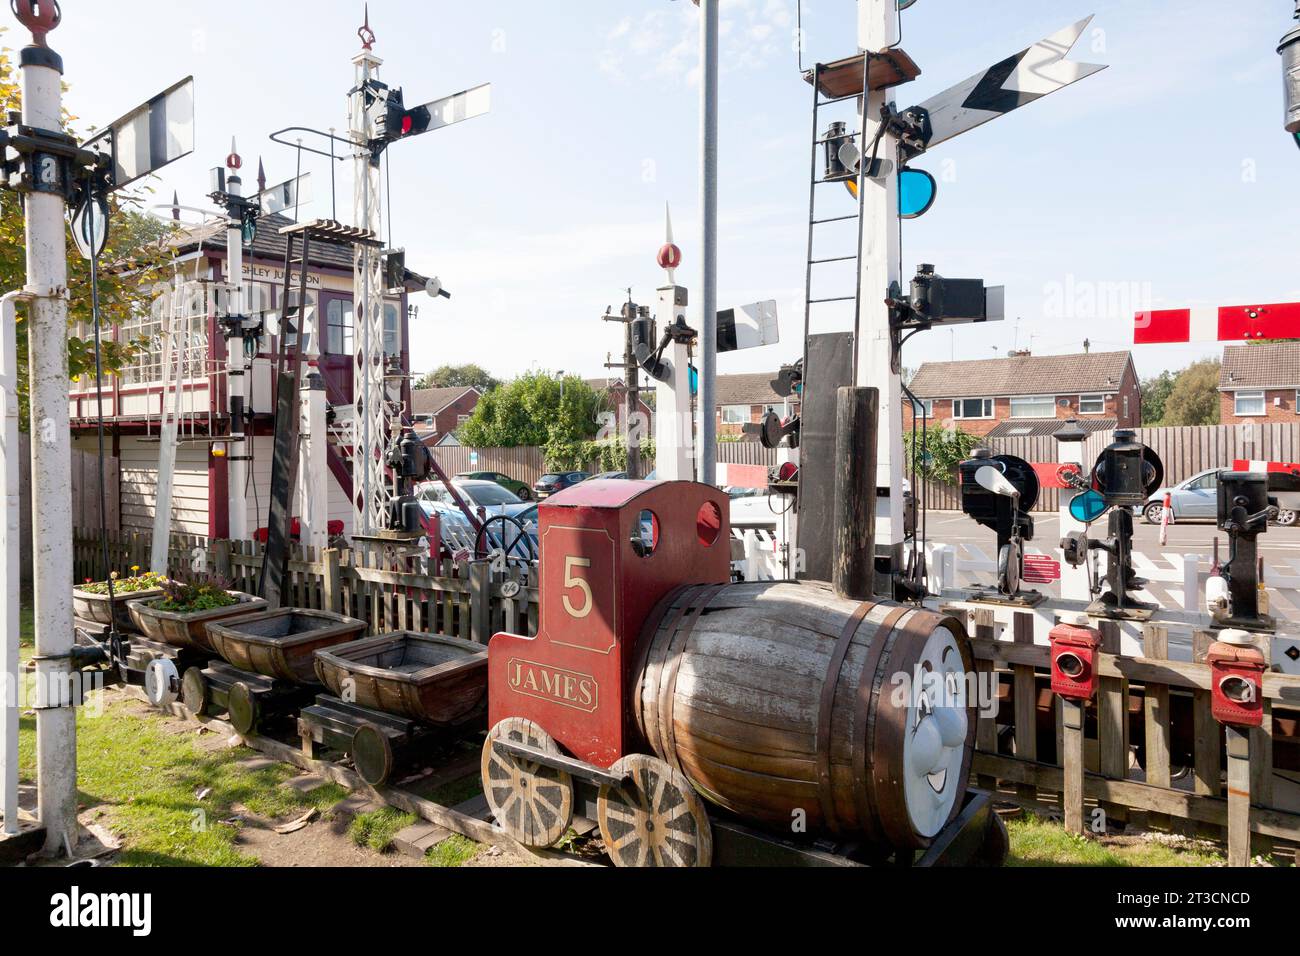 James the Tank Engine in 'No Man's Land' garden surrounded by preserved semaphore signals at Irlam Station, Greater Manchester Stock Photo